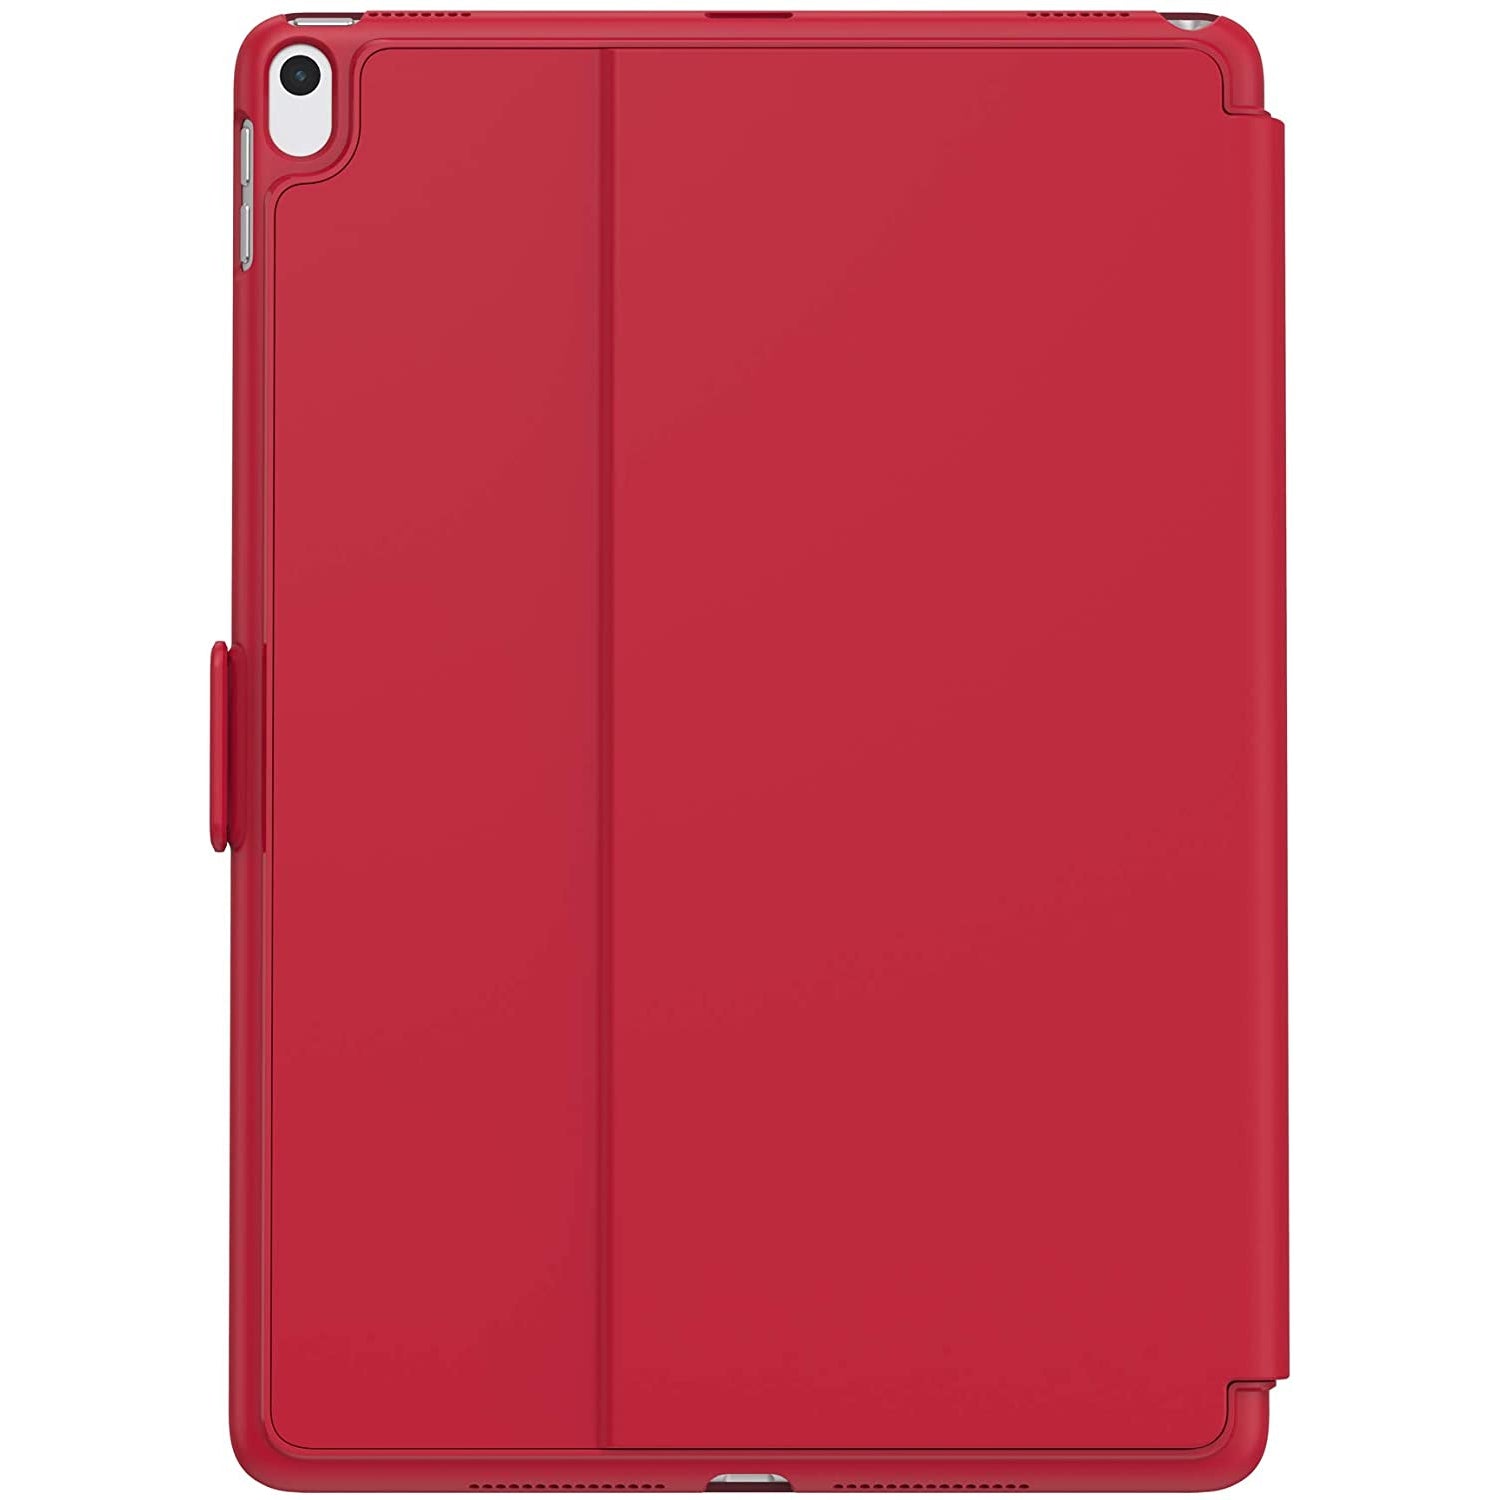 Speck Balance Folio Case for 10.5-Inch Apple iPad Air (2019) - Red